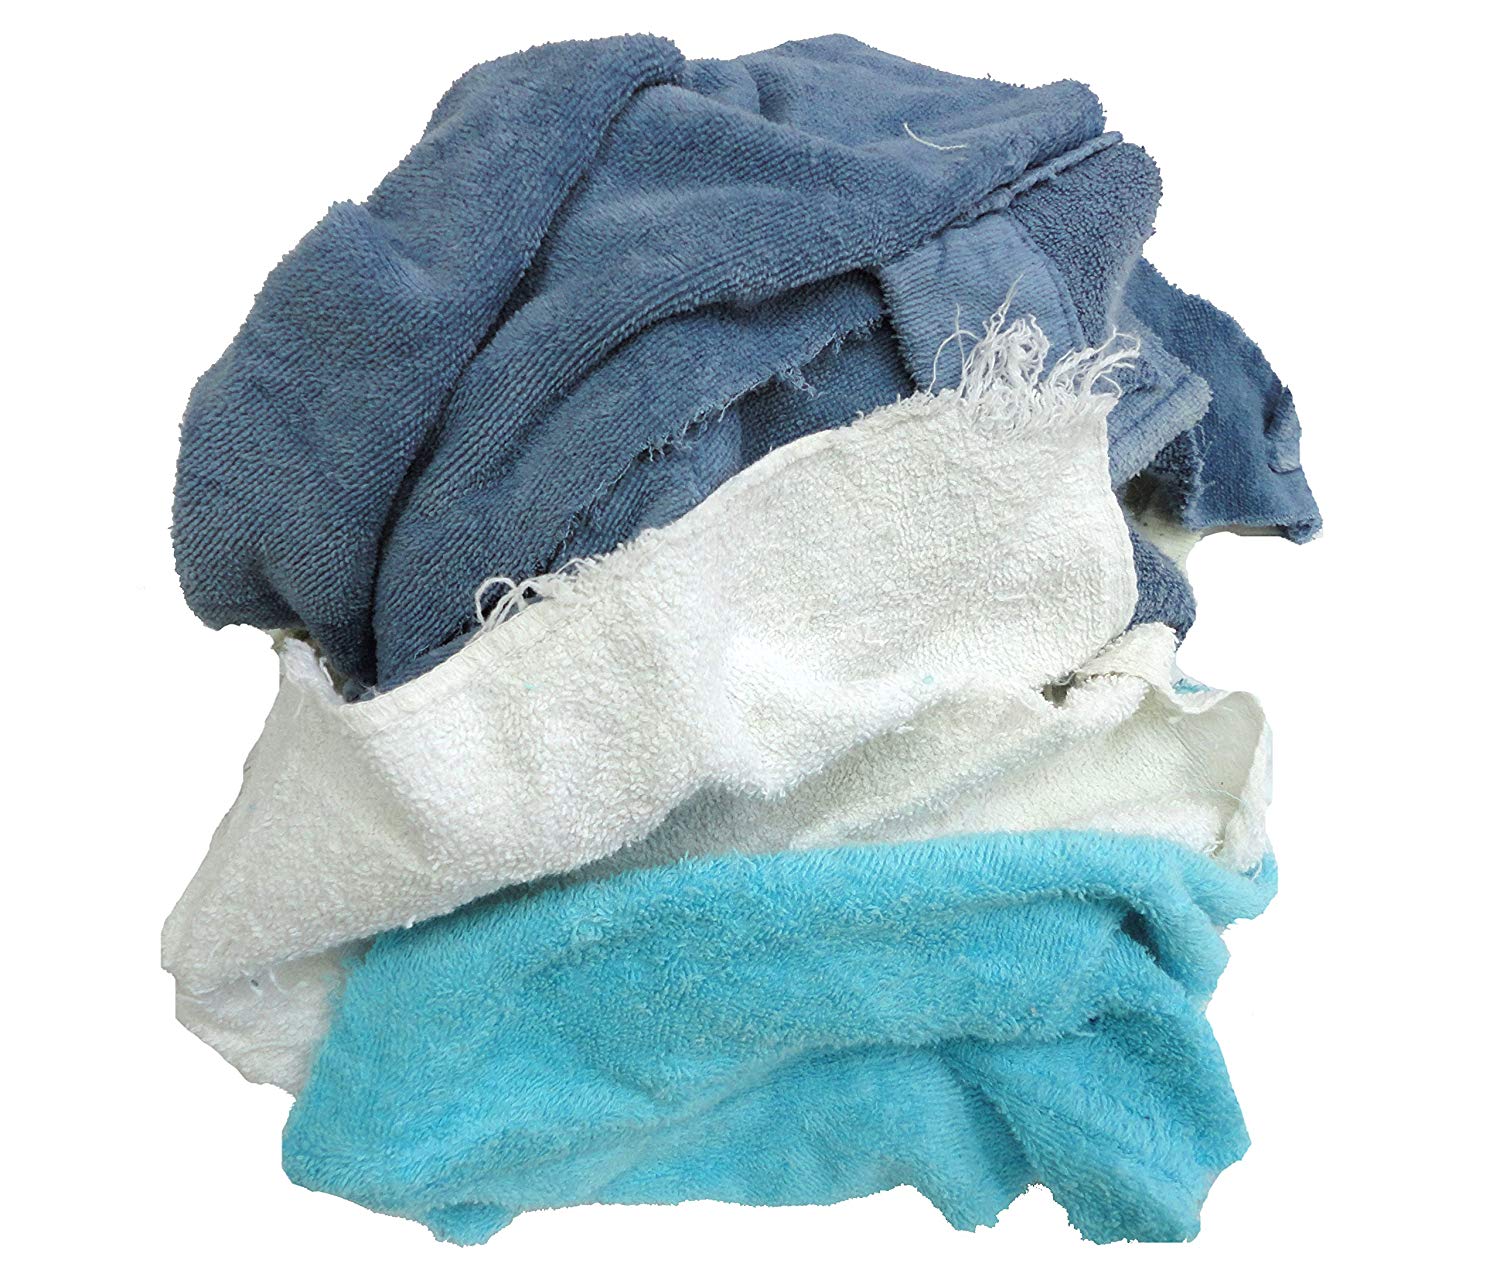 Wholesale Cloth Rags & Wipers, Cotton Rags